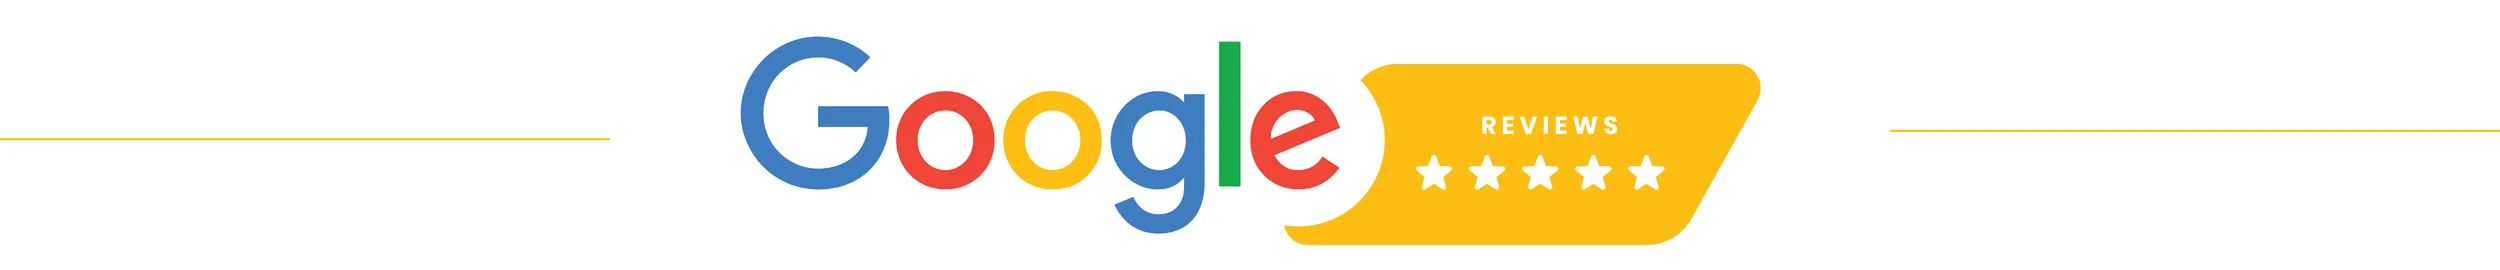 Google reviews logo with stars for local home contractors Wise Builders